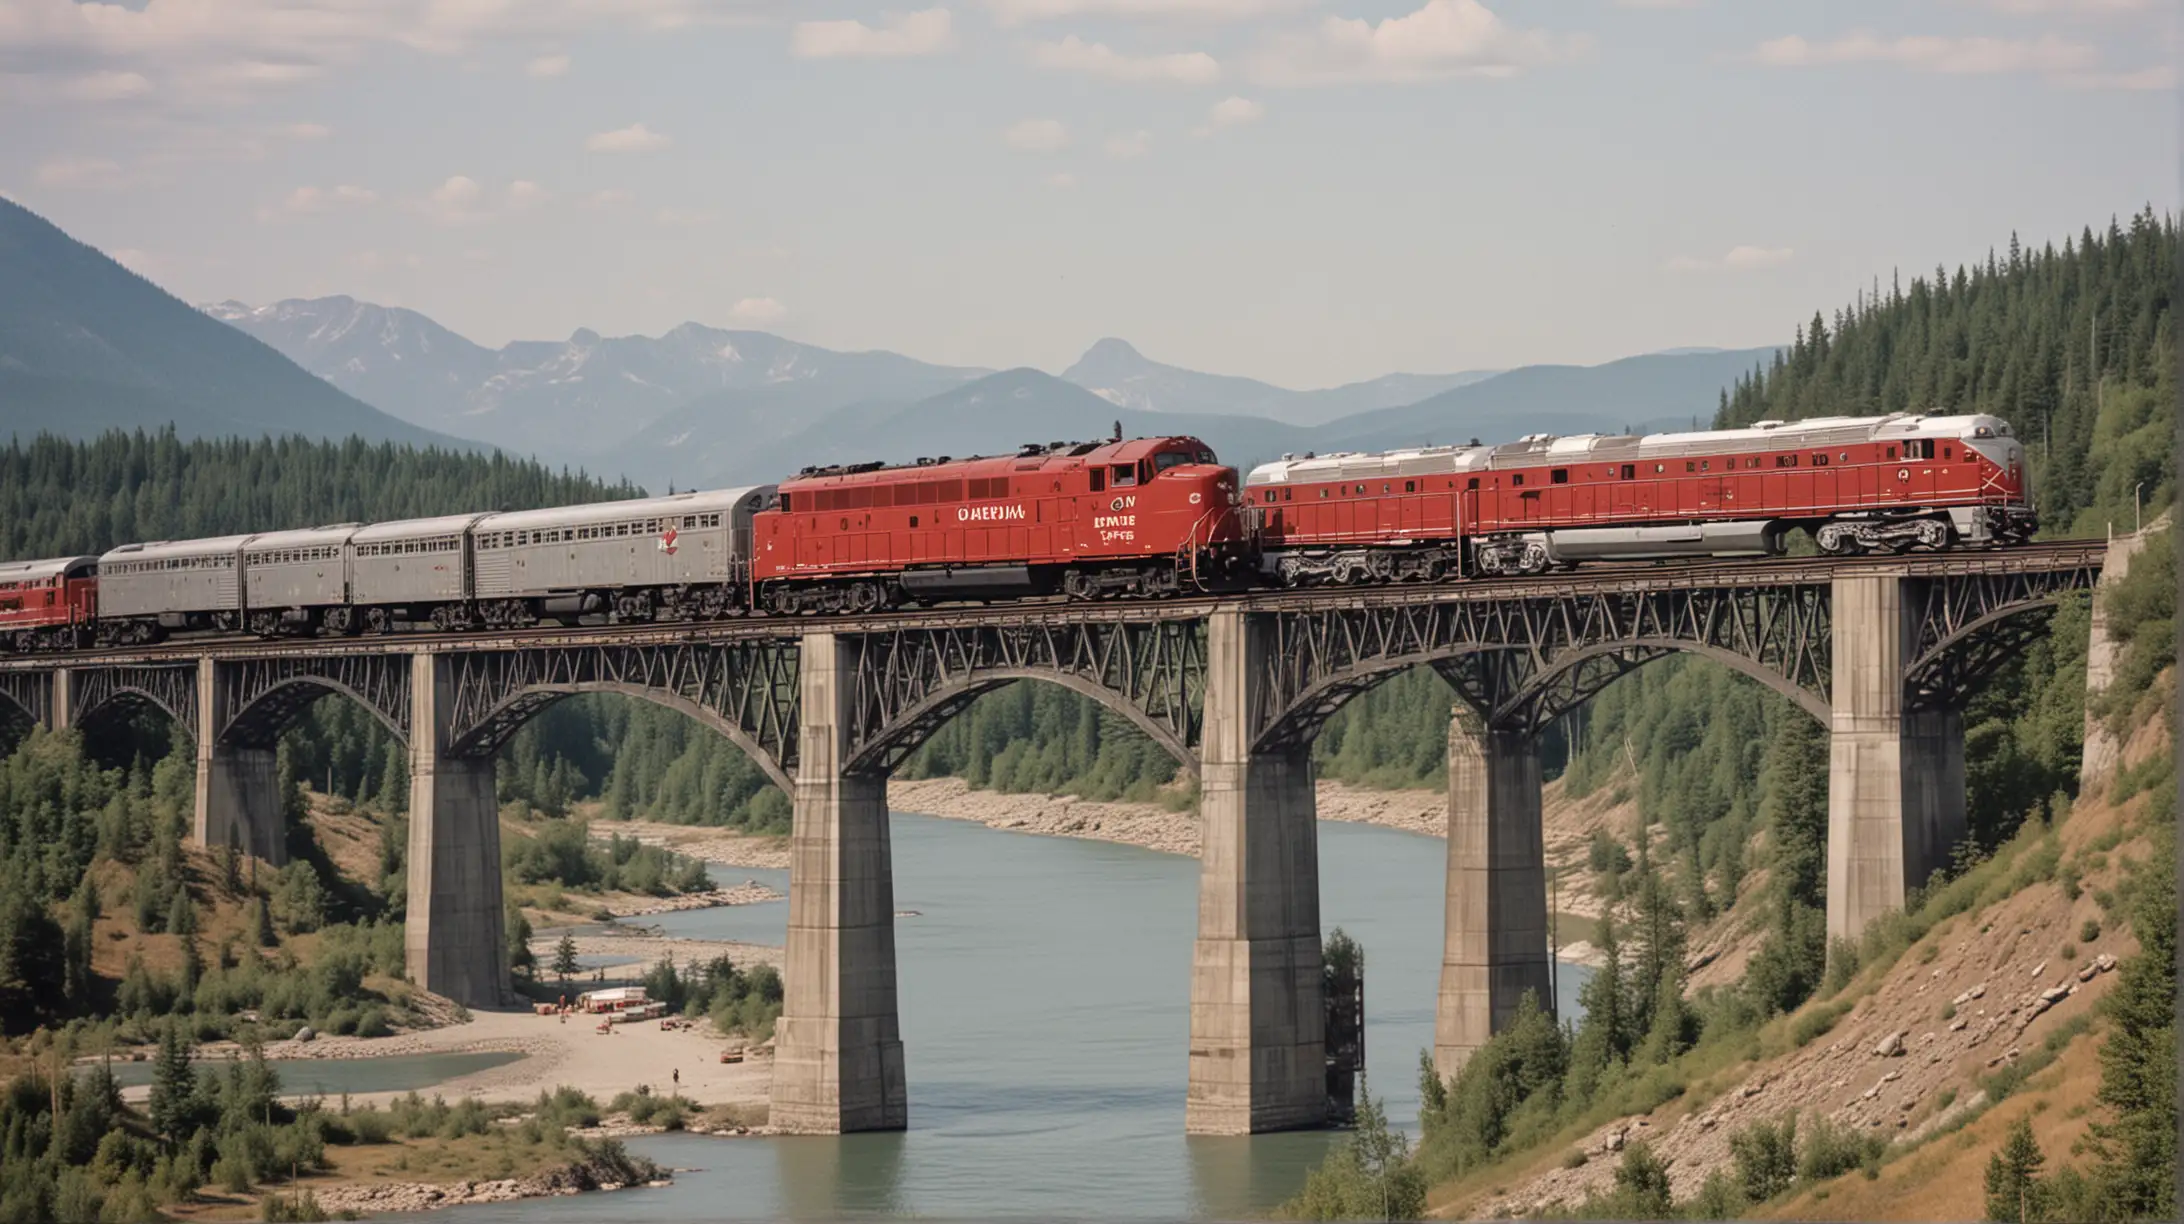 Canadian Pacific Passenger Train with Aluminum Passenger cars, Diesel Locomotives, in the style of the middle 1950s, passing across a major bridge.